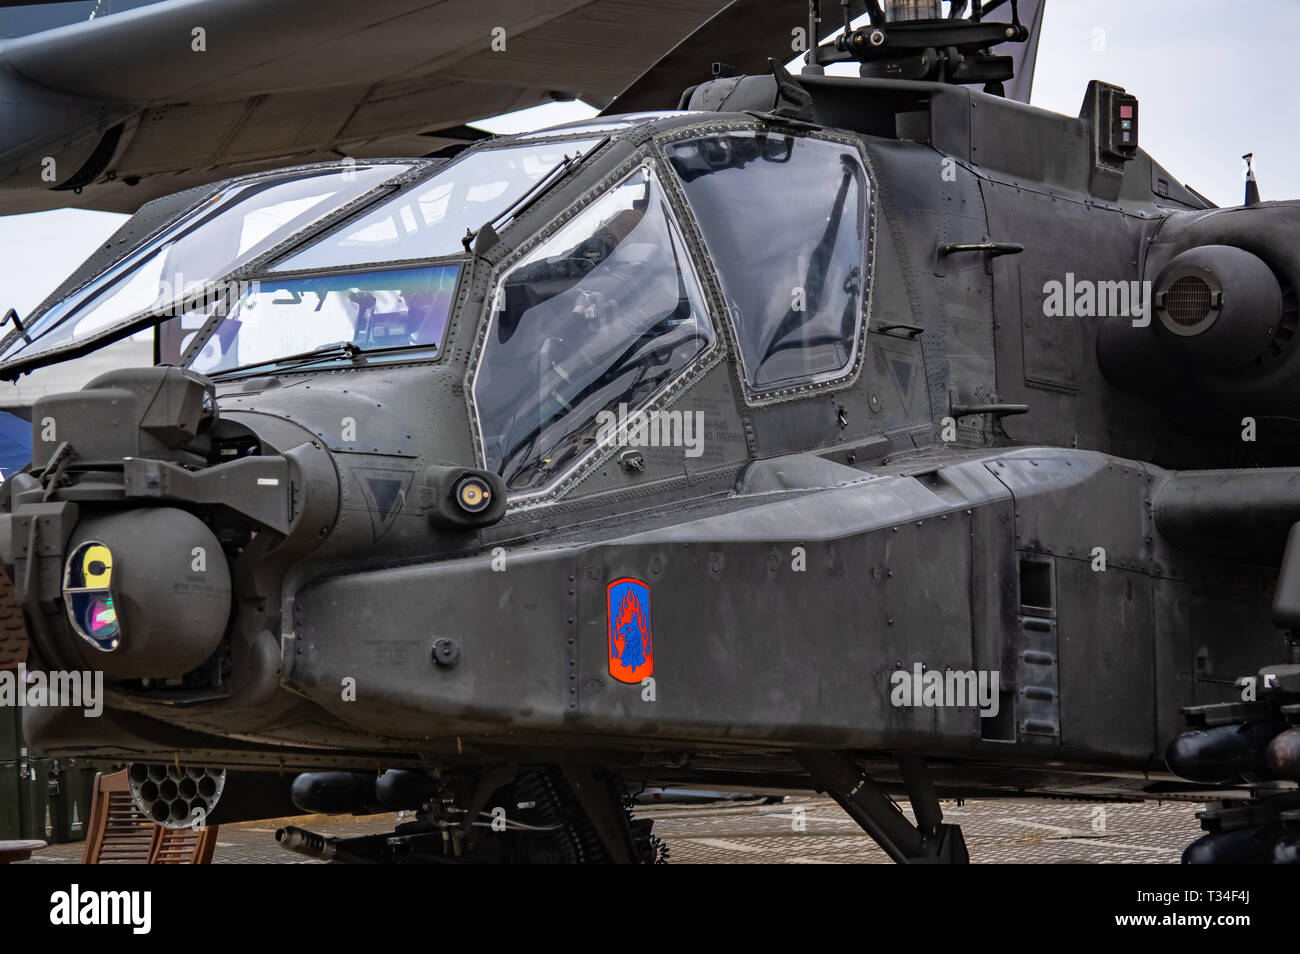 An Apache attack helicopter on static display at Farnborough air show 2018 Stock Photo